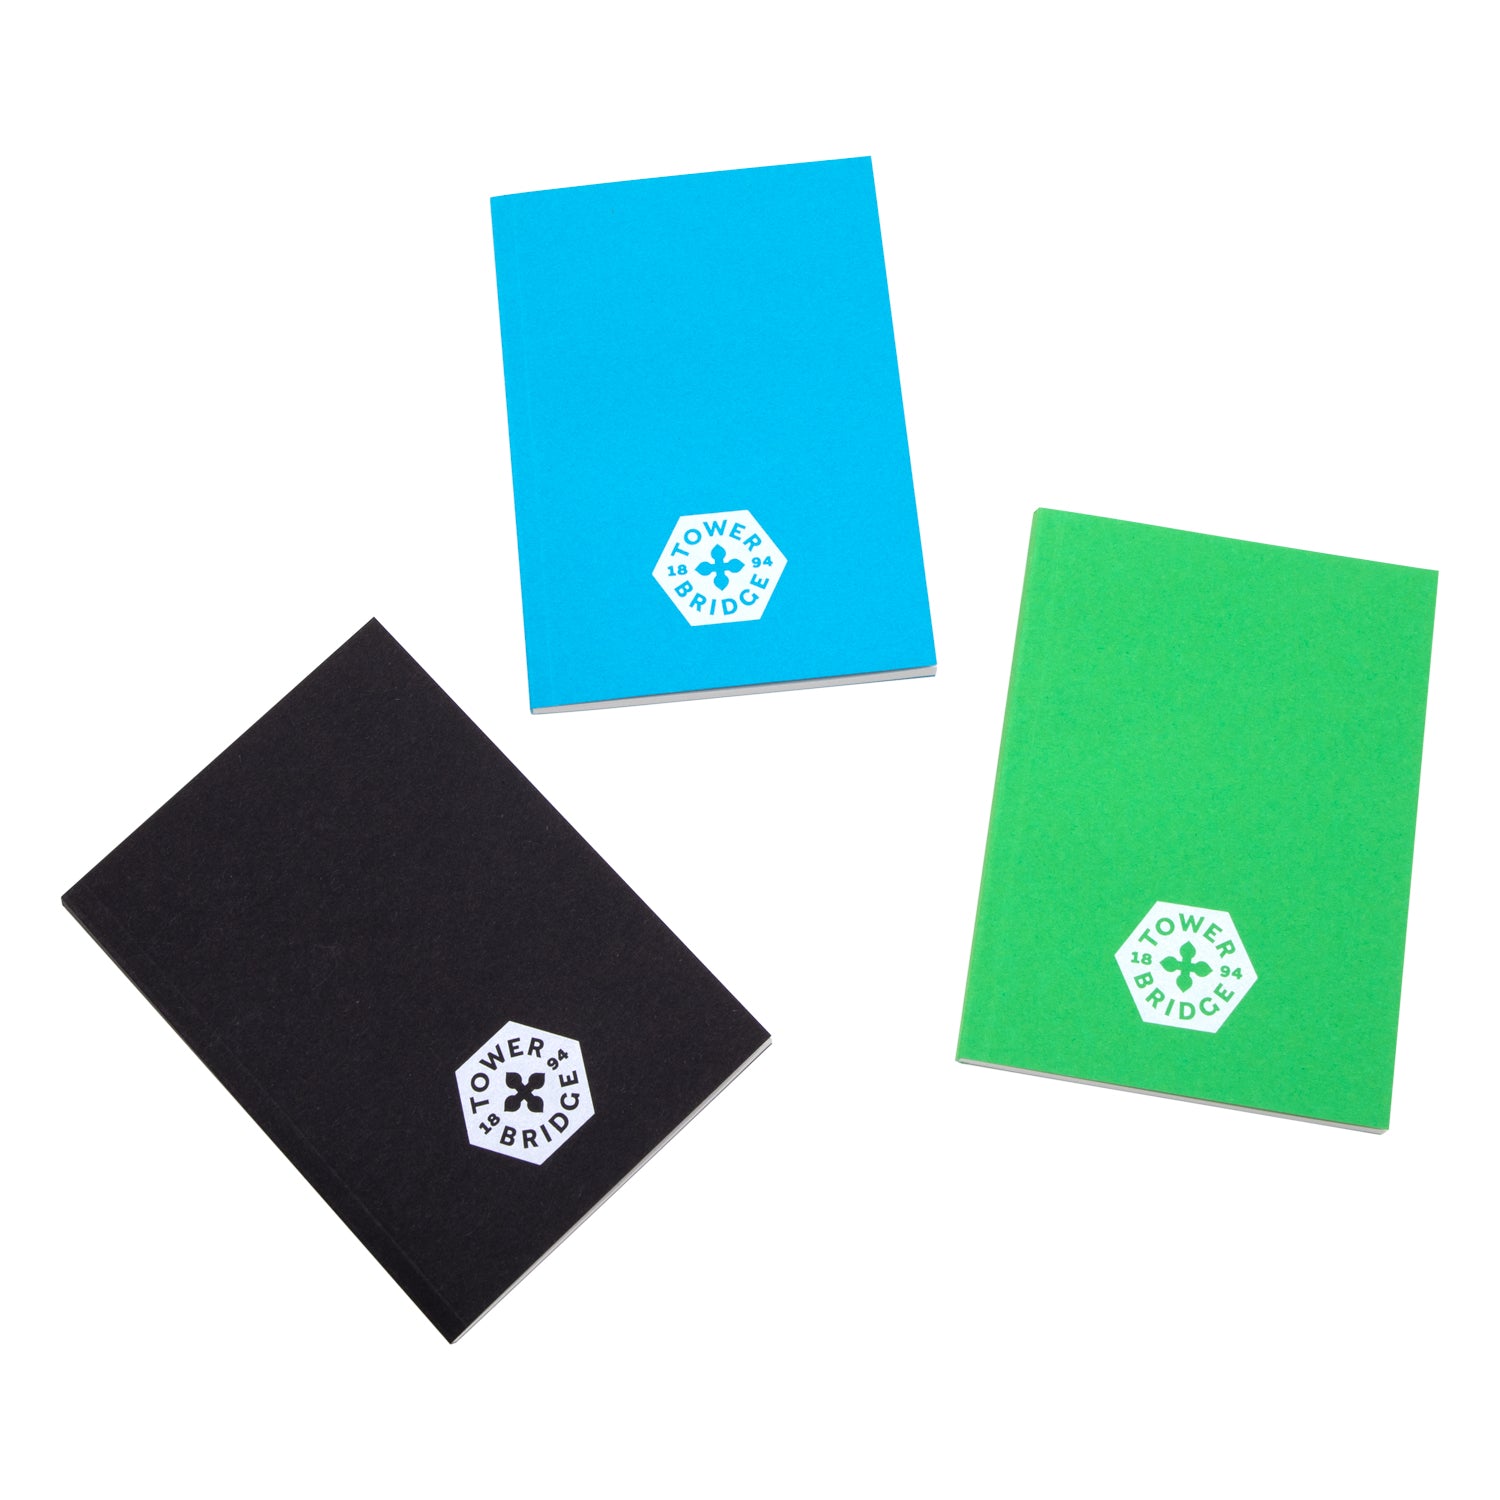 Tower Bridge Eco Recycled Till Receipts Notebook A6